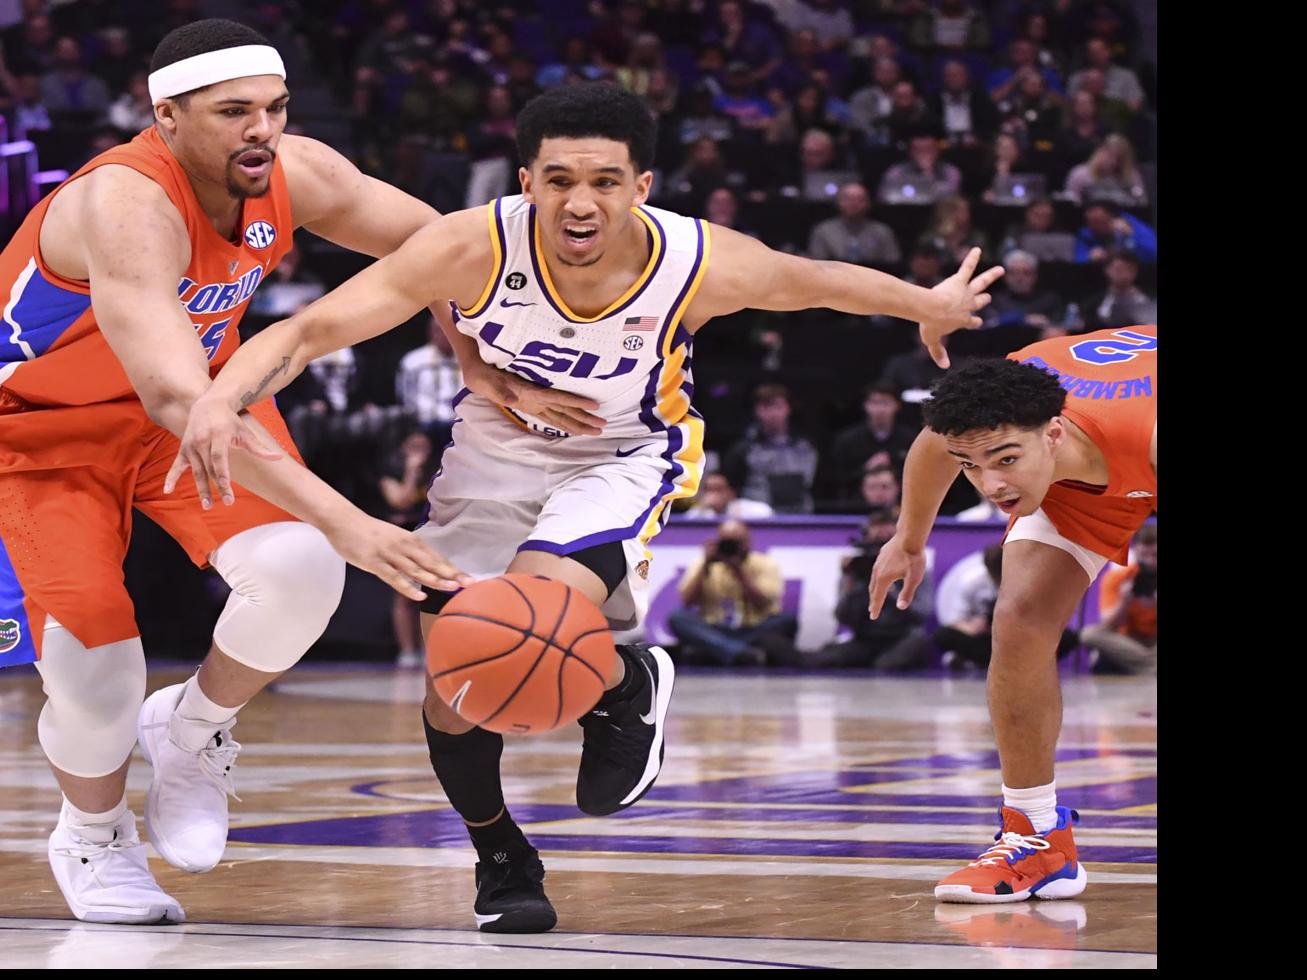 A Childhood Celtics Fan Lsu S Tremont Waters Hits Boston With Message For Doubters I Belong Here Lsu Theadvocate Com